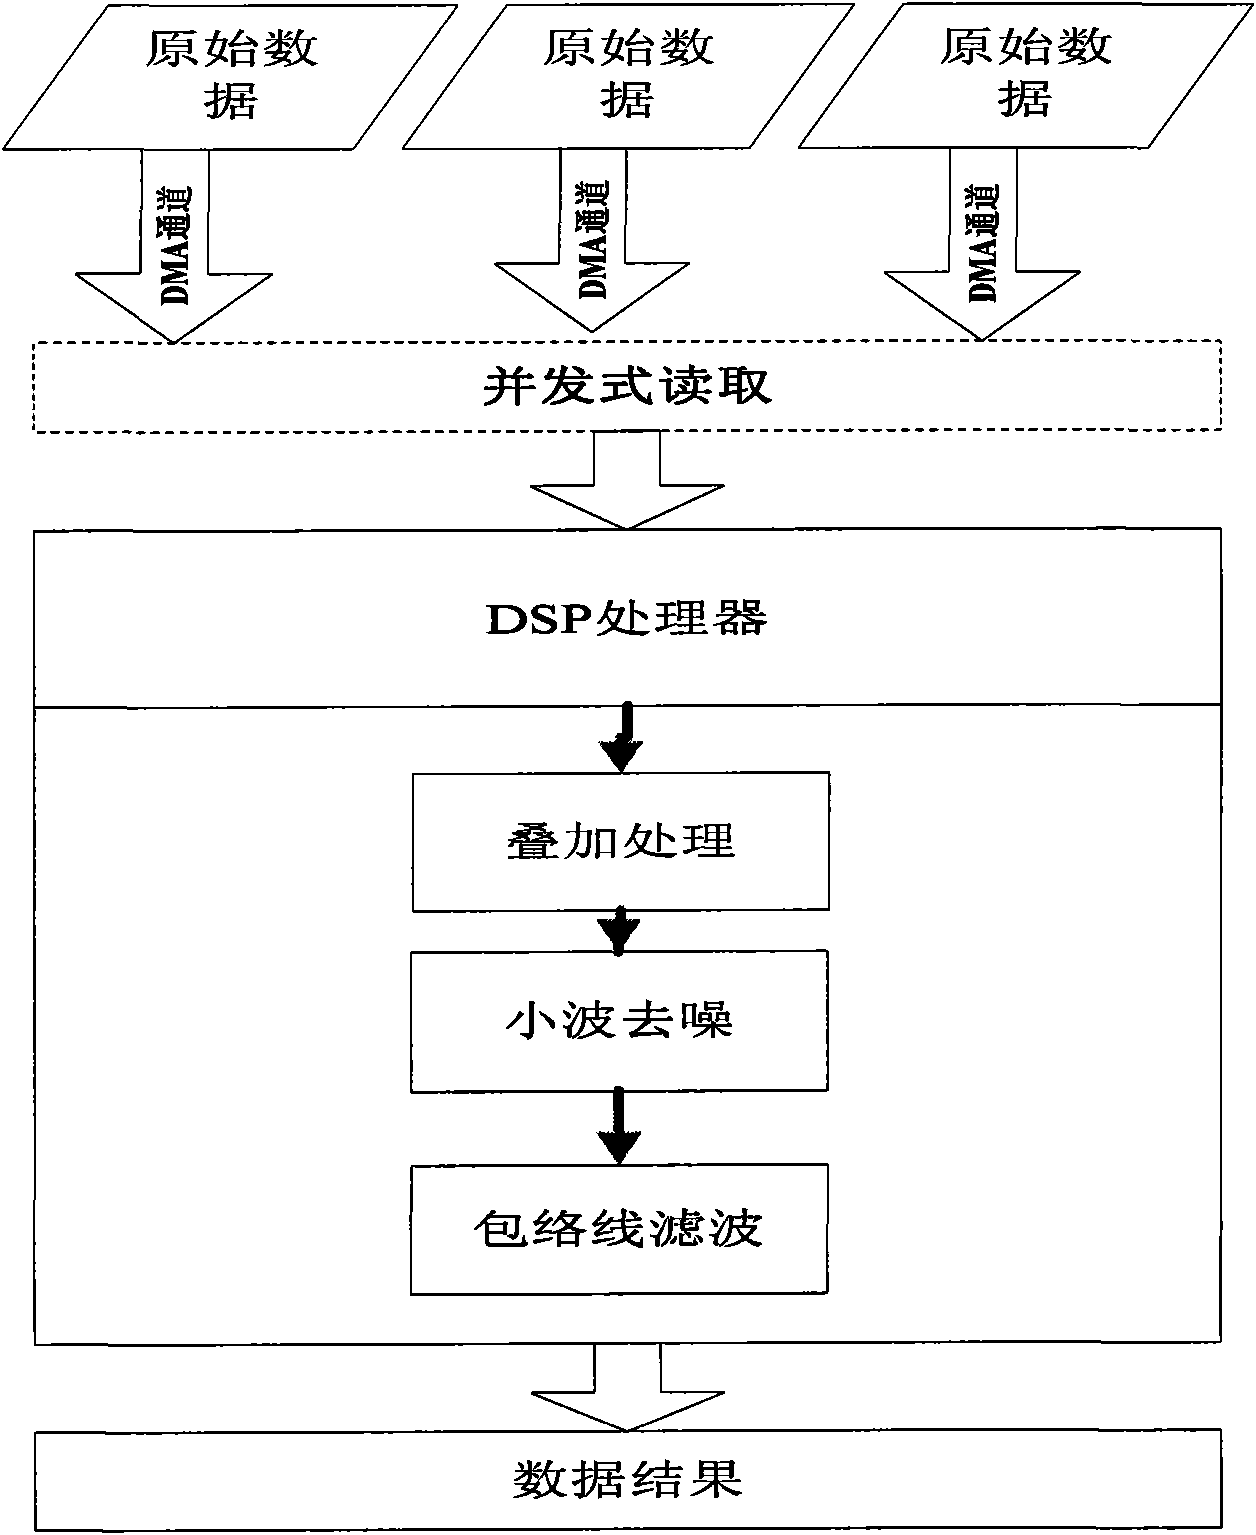 Method for processing ultralow frequency data